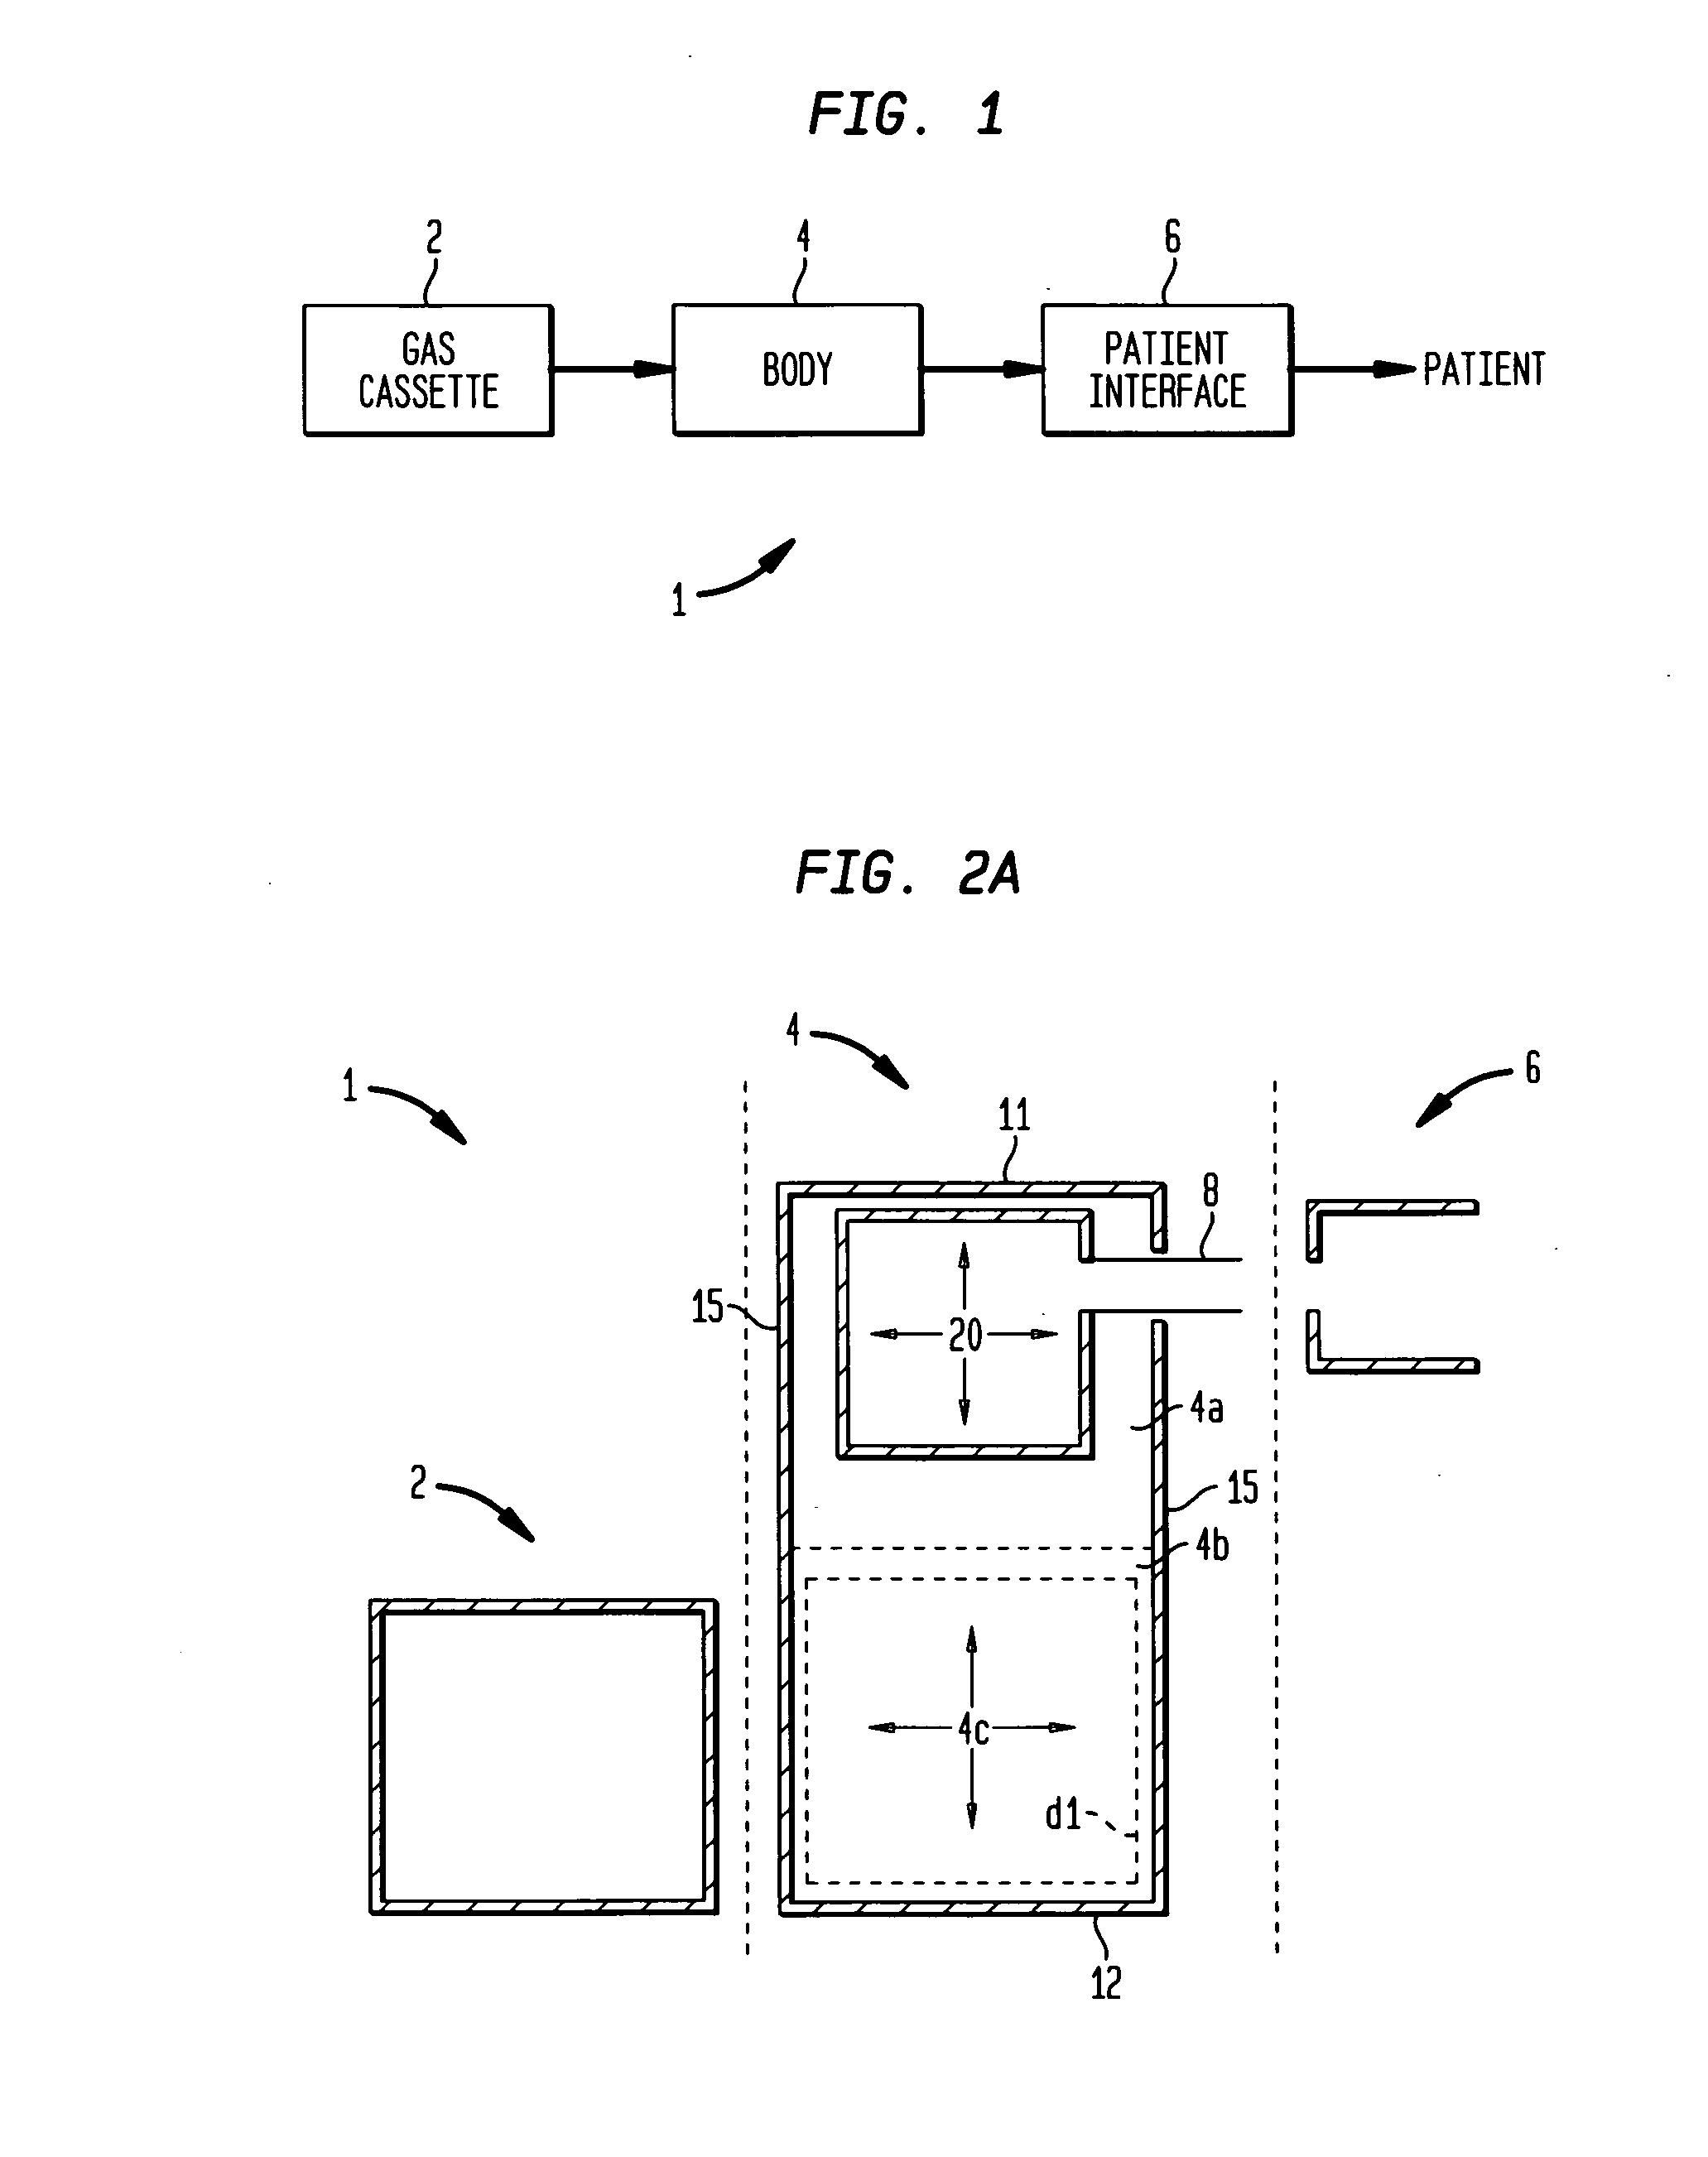 Method for administration of therapeutic gases